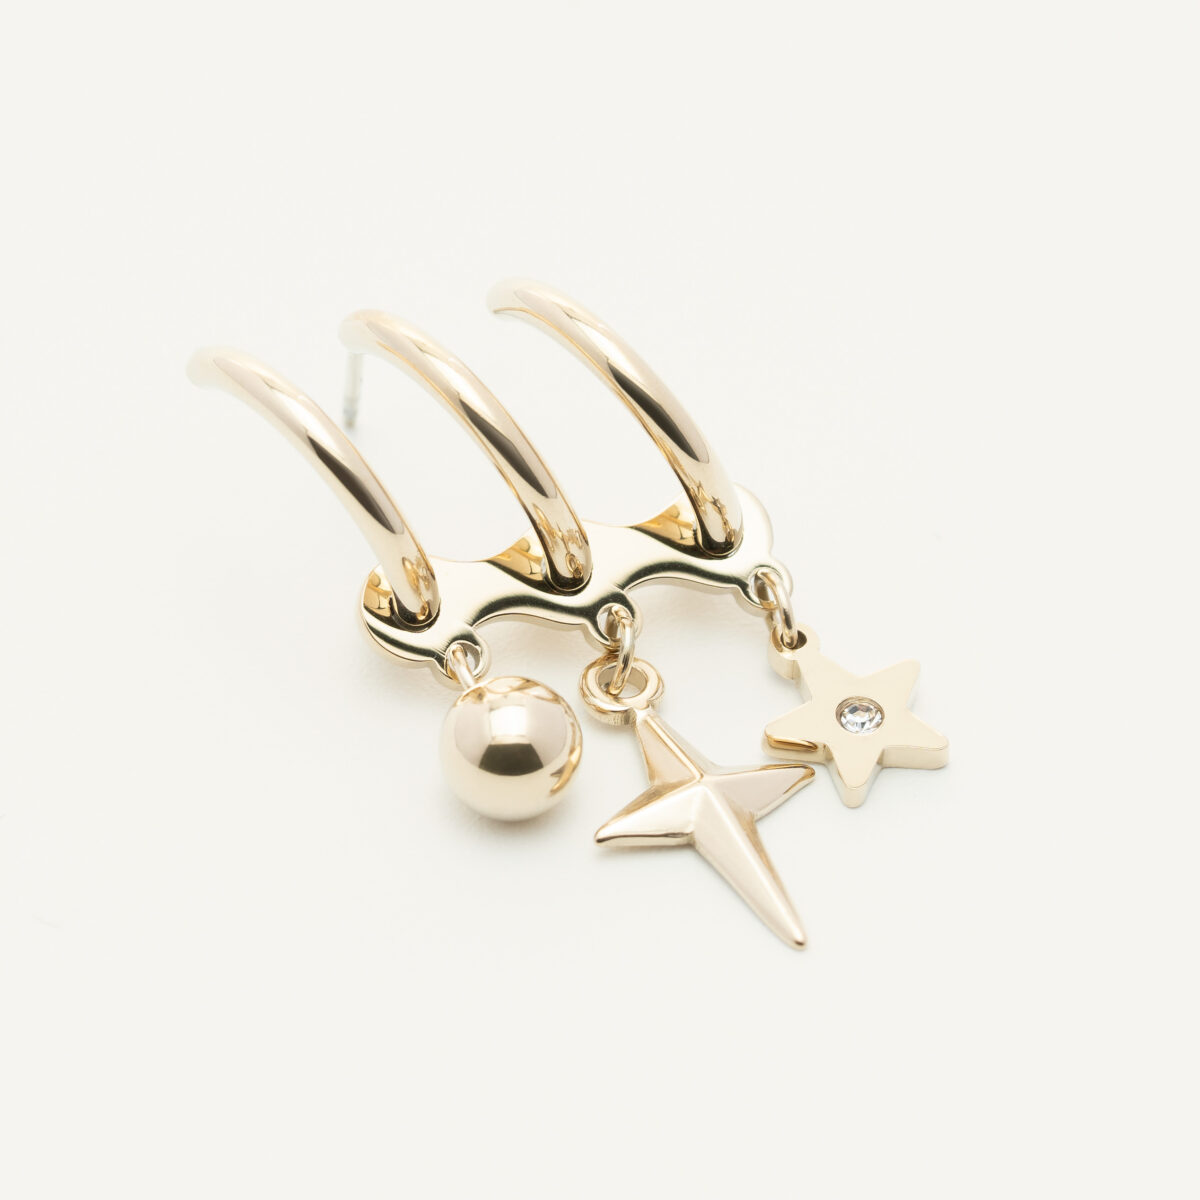 https://m.clubbella.co/product/radial-18k-gold-plated-ear-crawler-earrings/ RADIAL CRAWLER EARRINGS (1)